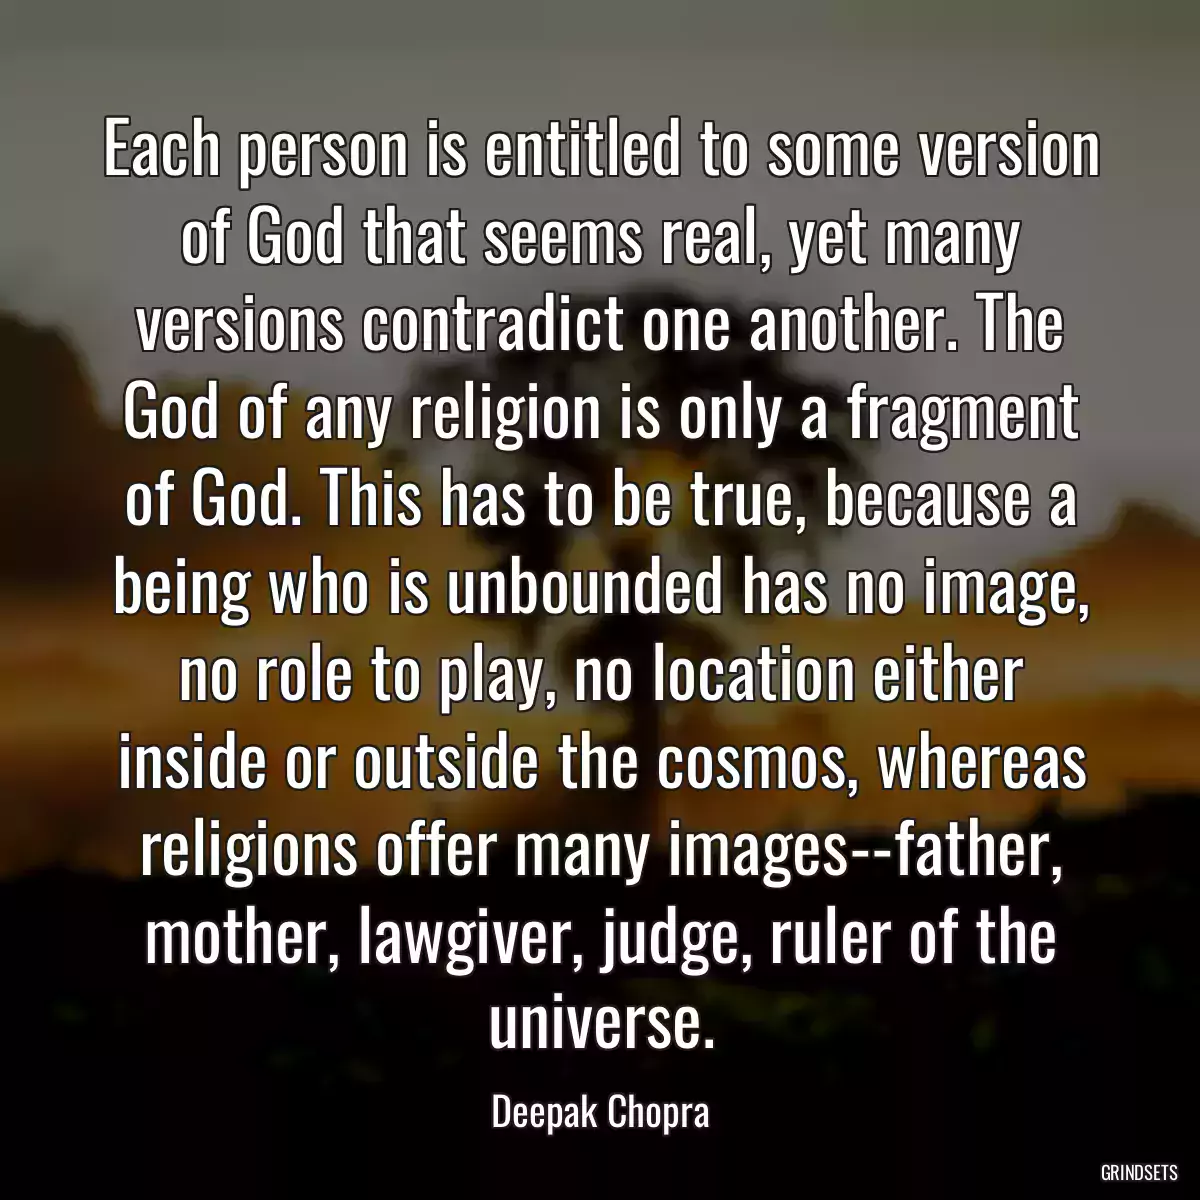 Each person is entitled to some version of God that seems real, yet many versions contradict one another. The God of any religion is only a fragment of God. This has to be true, because a being who is unbounded has no image, no role to play, no location either inside or outside the cosmos, whereas religions offer many images--father, mother, lawgiver, judge, ruler of the universe.